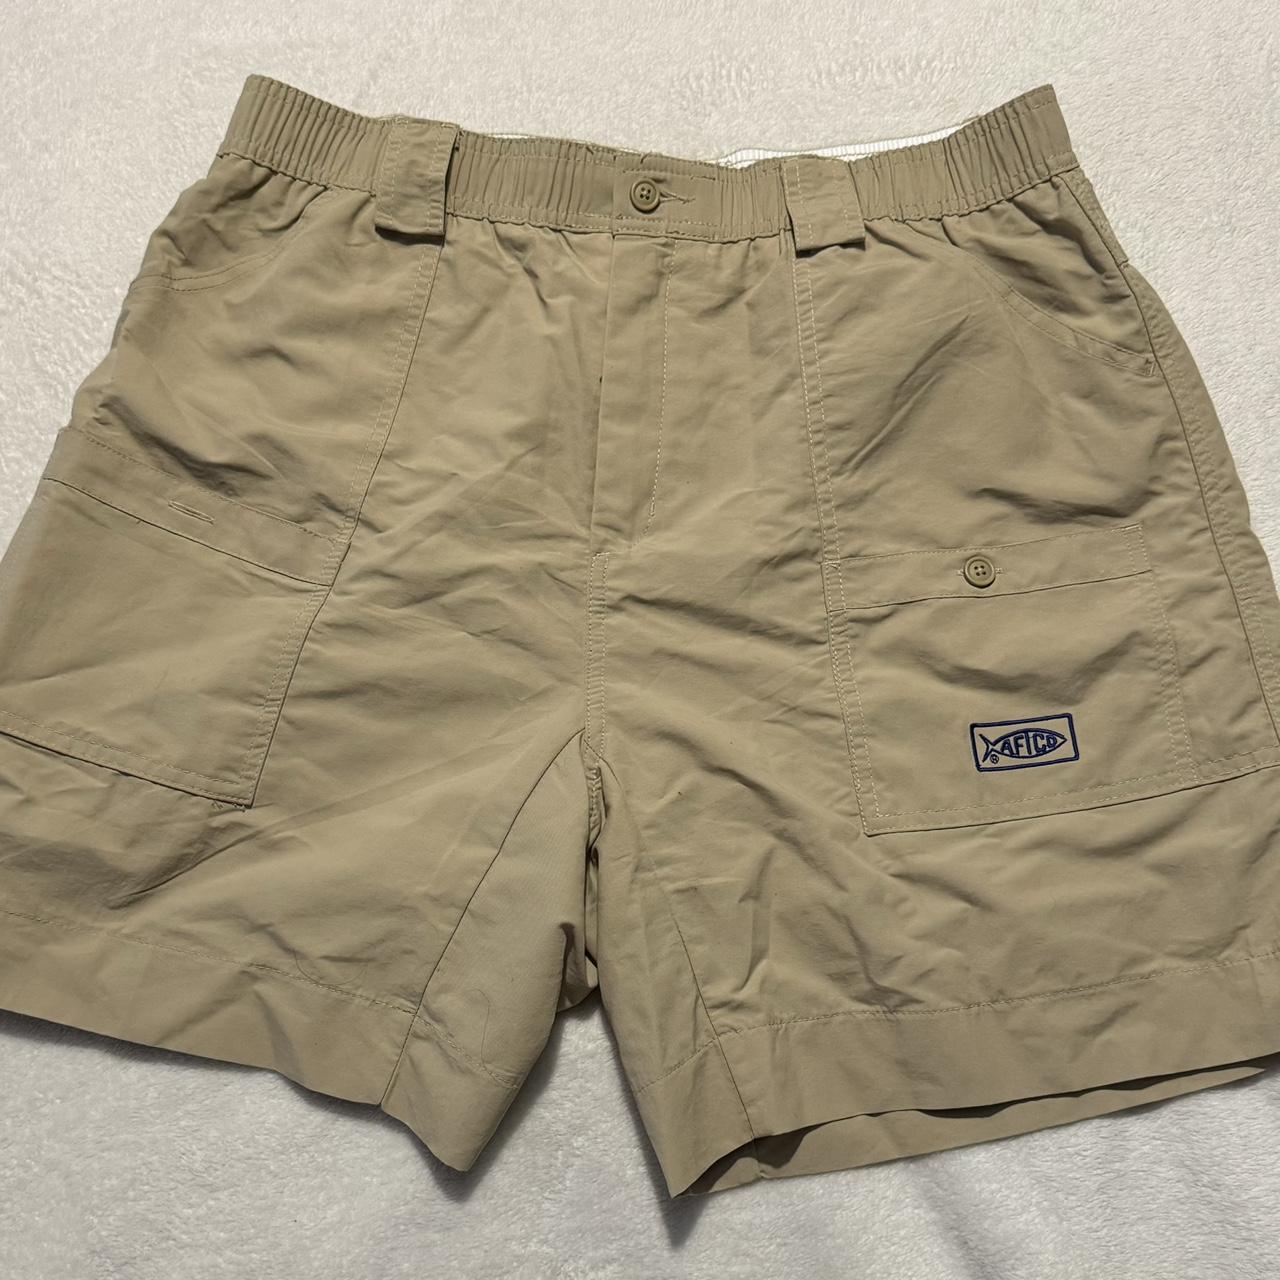 Aftco fast drying fishing shorts size 38, 7 inch - Depop